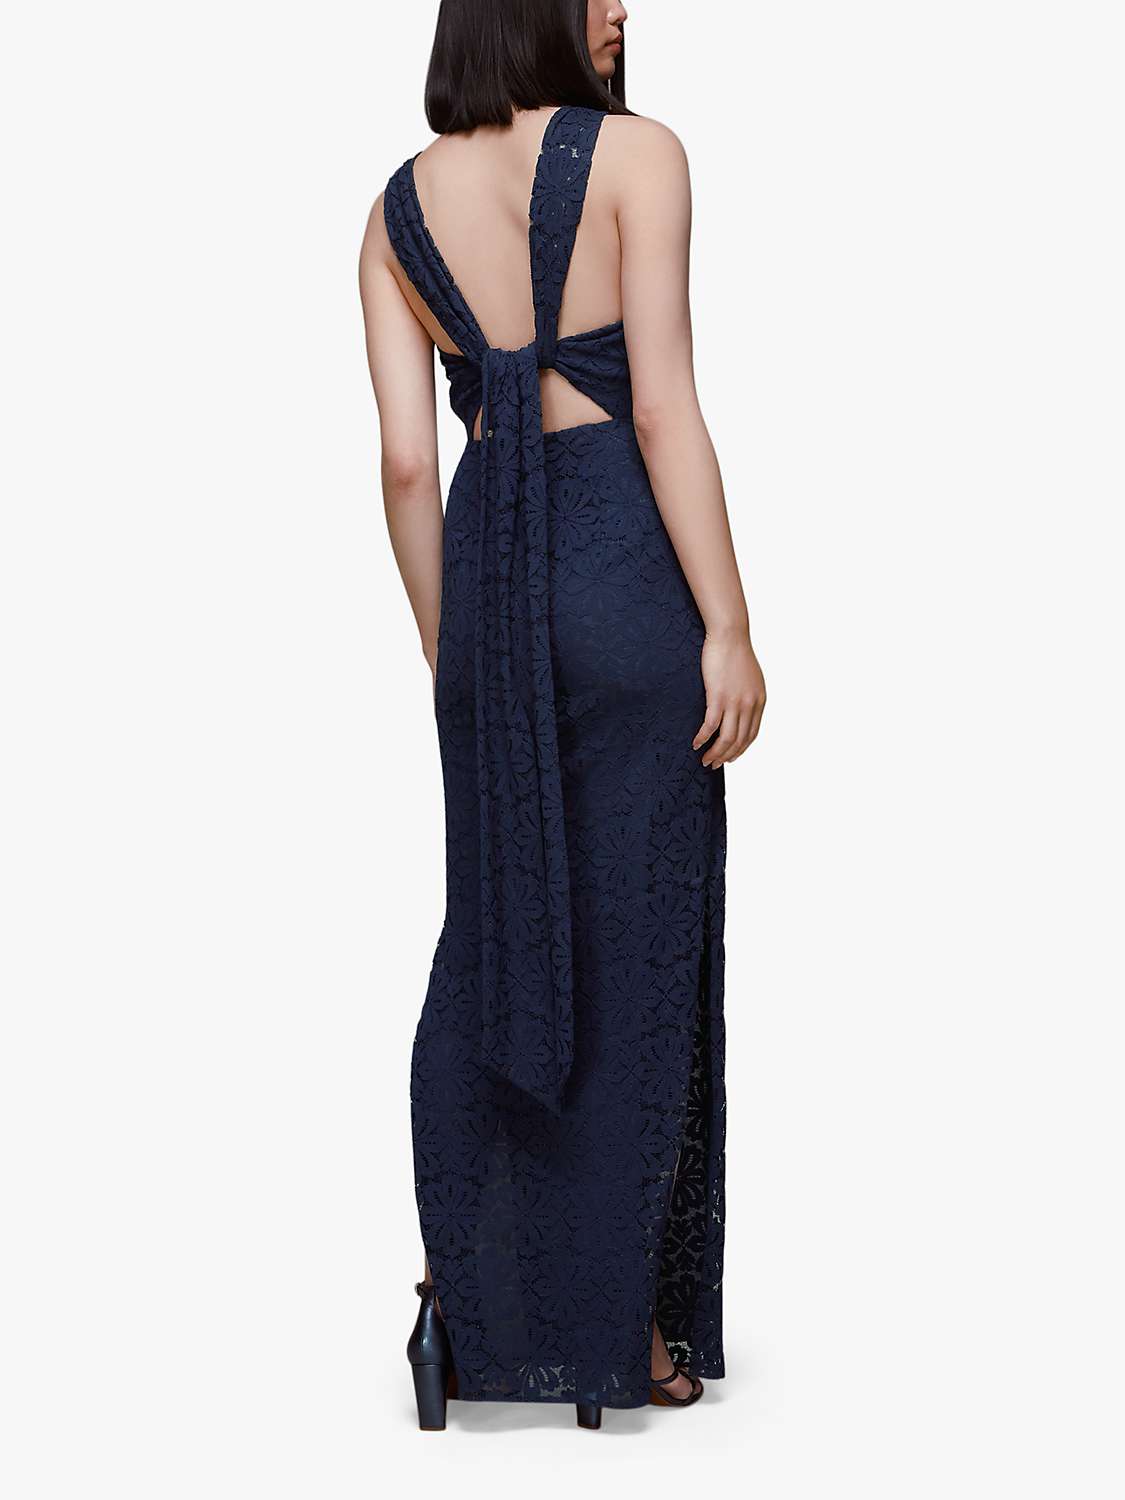 Buy Whistles  Lace Tie Back Maxi Dress, Navy Online at johnlewis.com